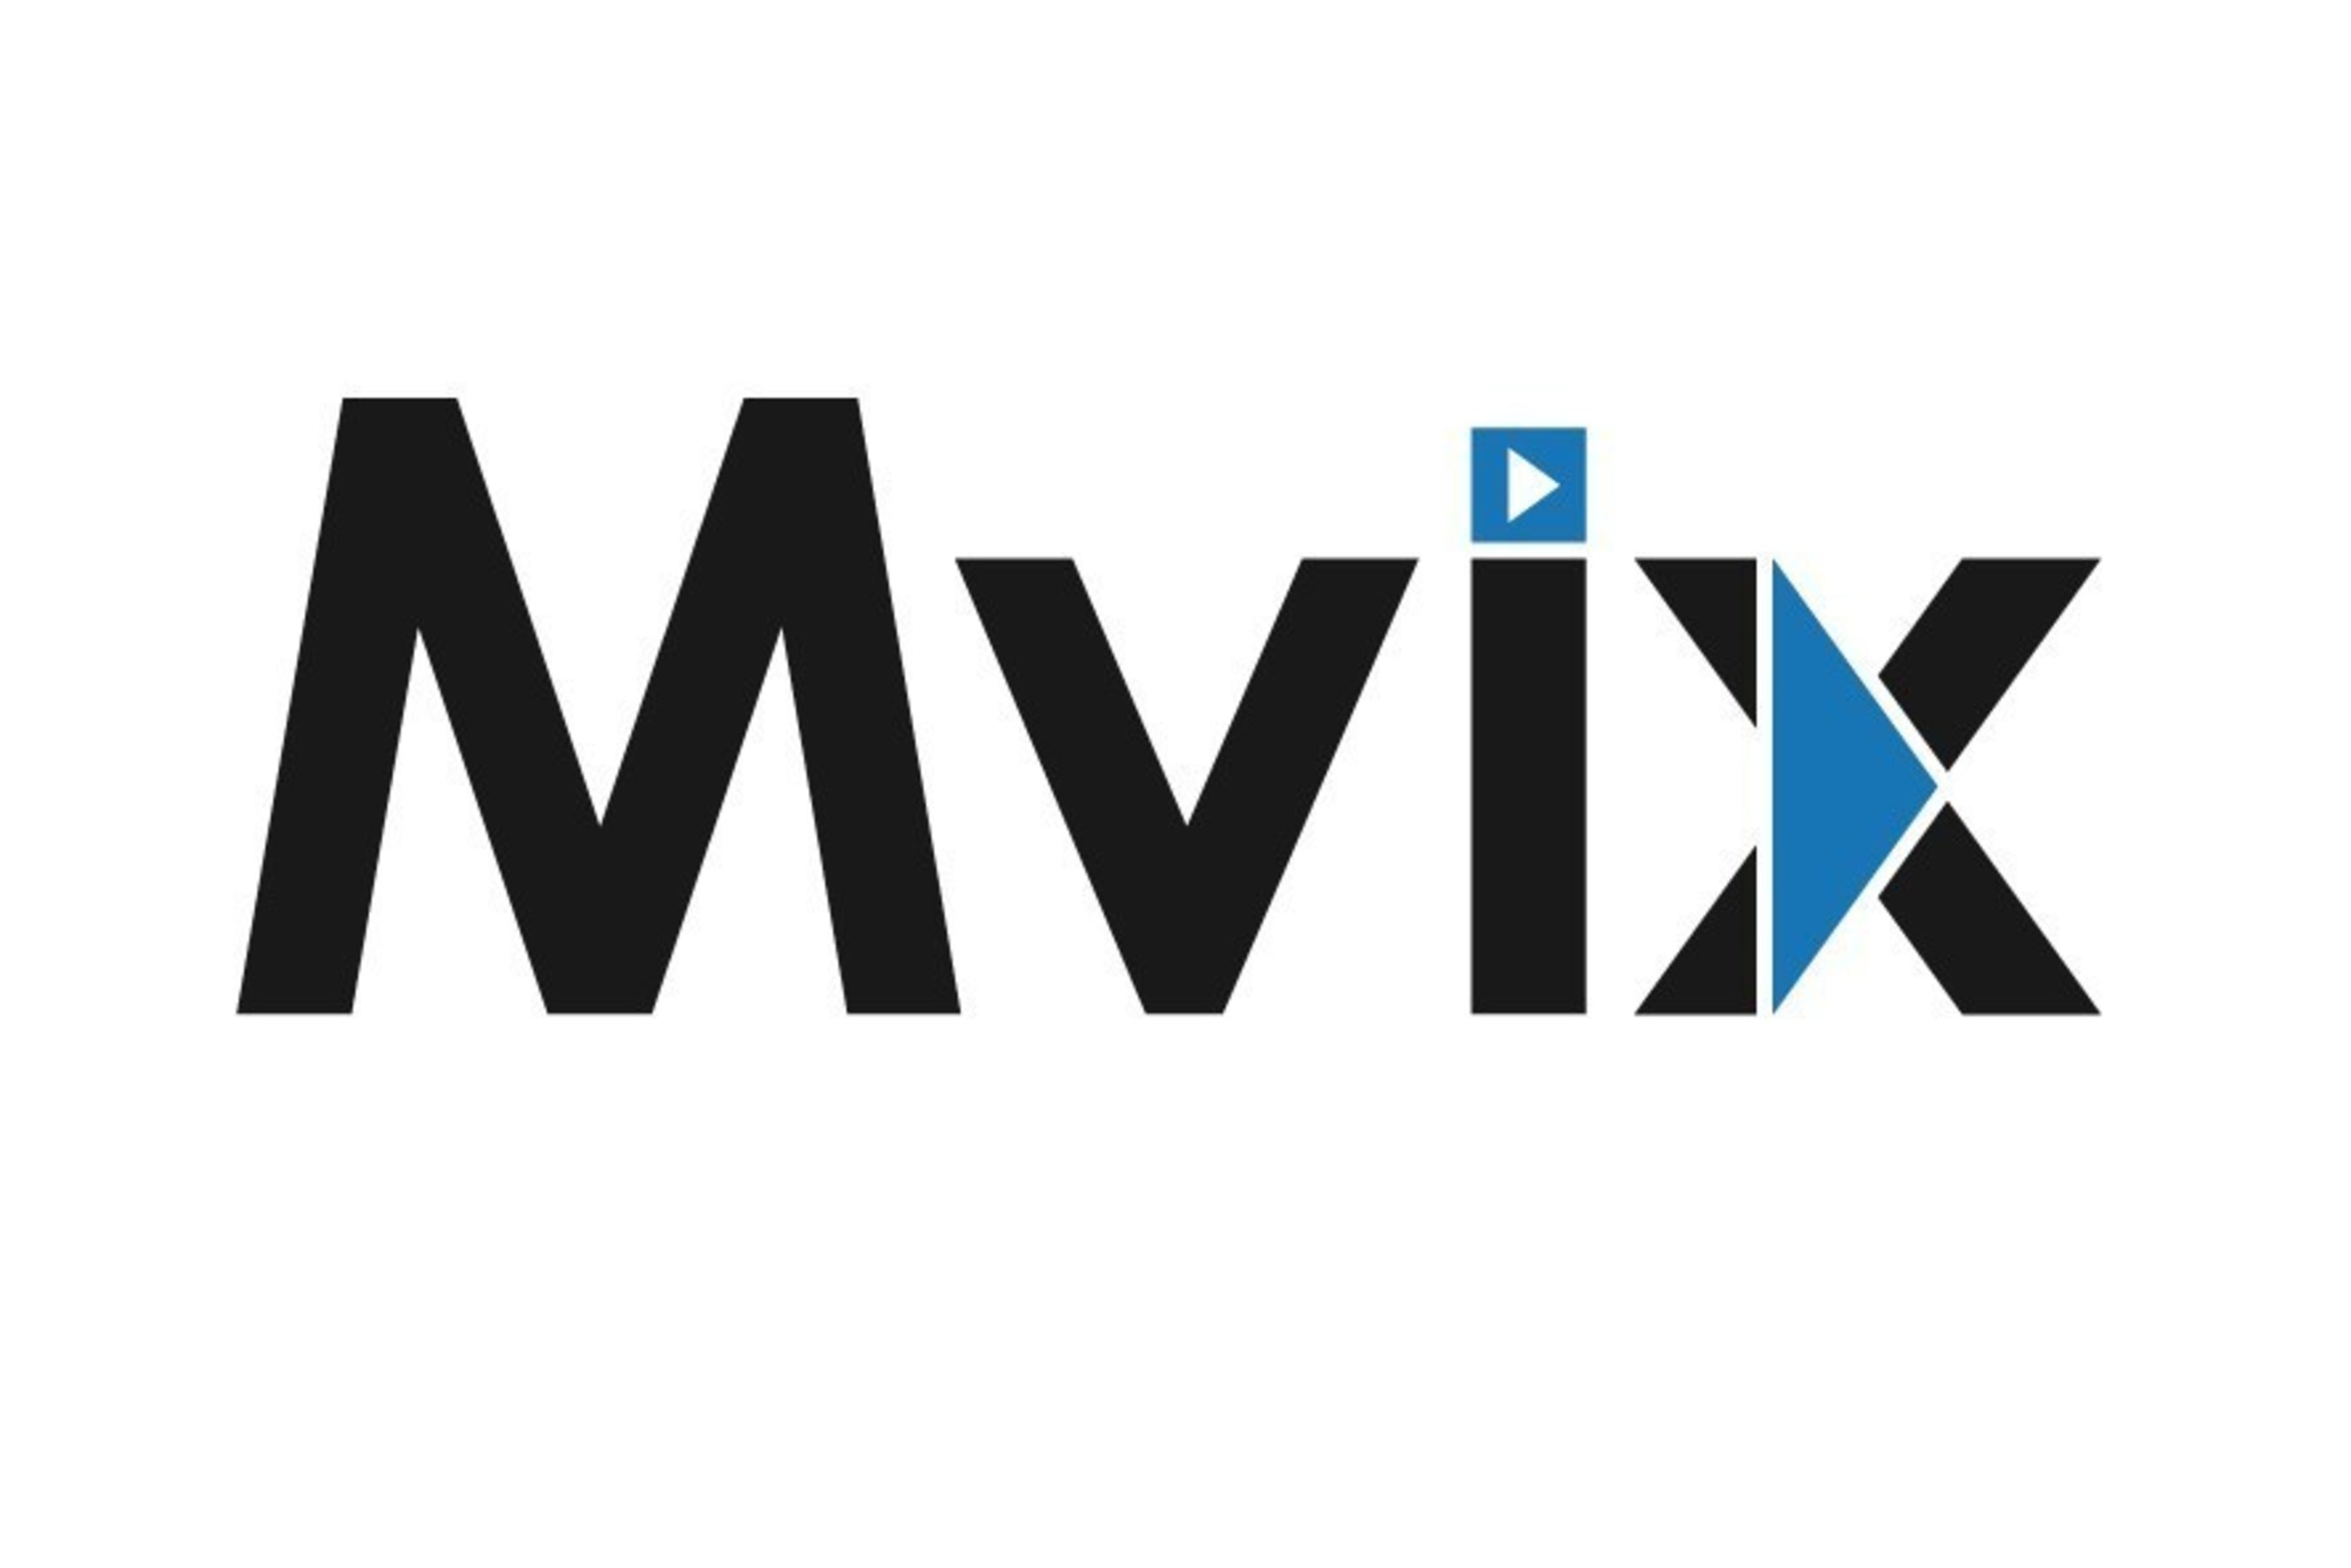 Mvix, a leading provider of cloud-based digital signage solutions, today announced the launch of a digital signage app, the Mvix Andros App. Available on the Amazon AppStore, the Andros App turns the Amazon Fire TV(R) device into a digital signage player.